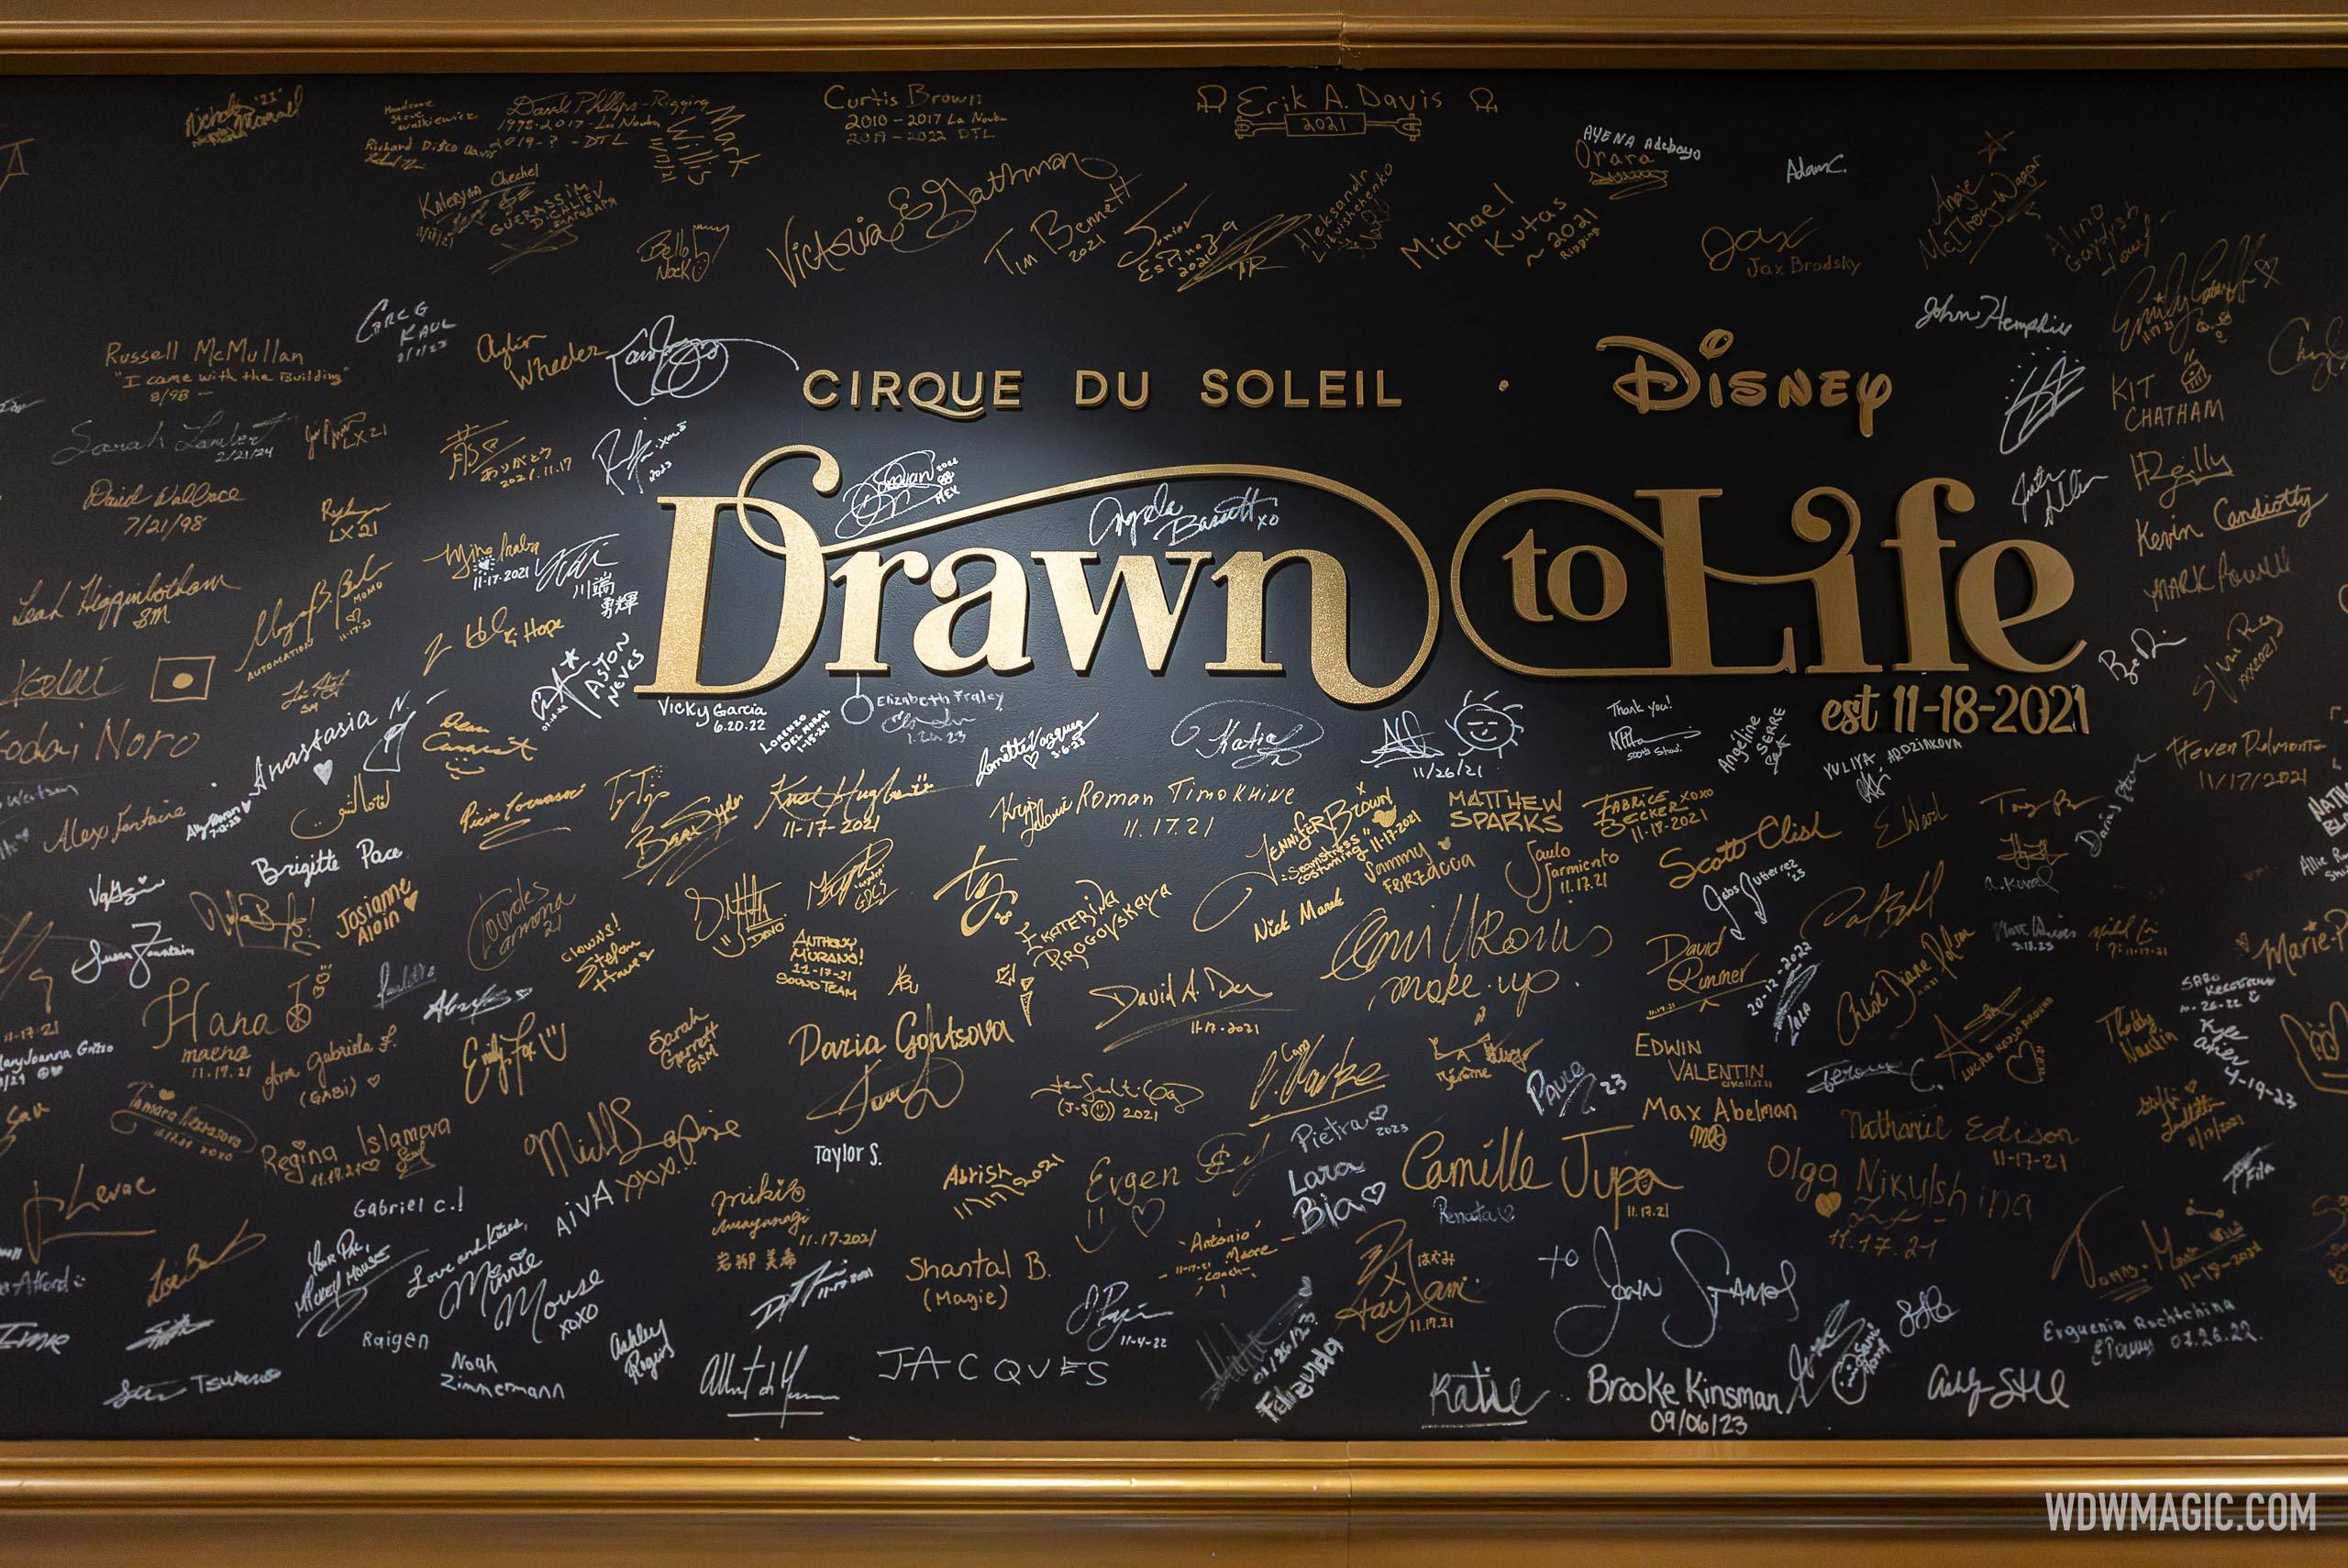 Wall of signatures from past and present Cirque du Soleil artists